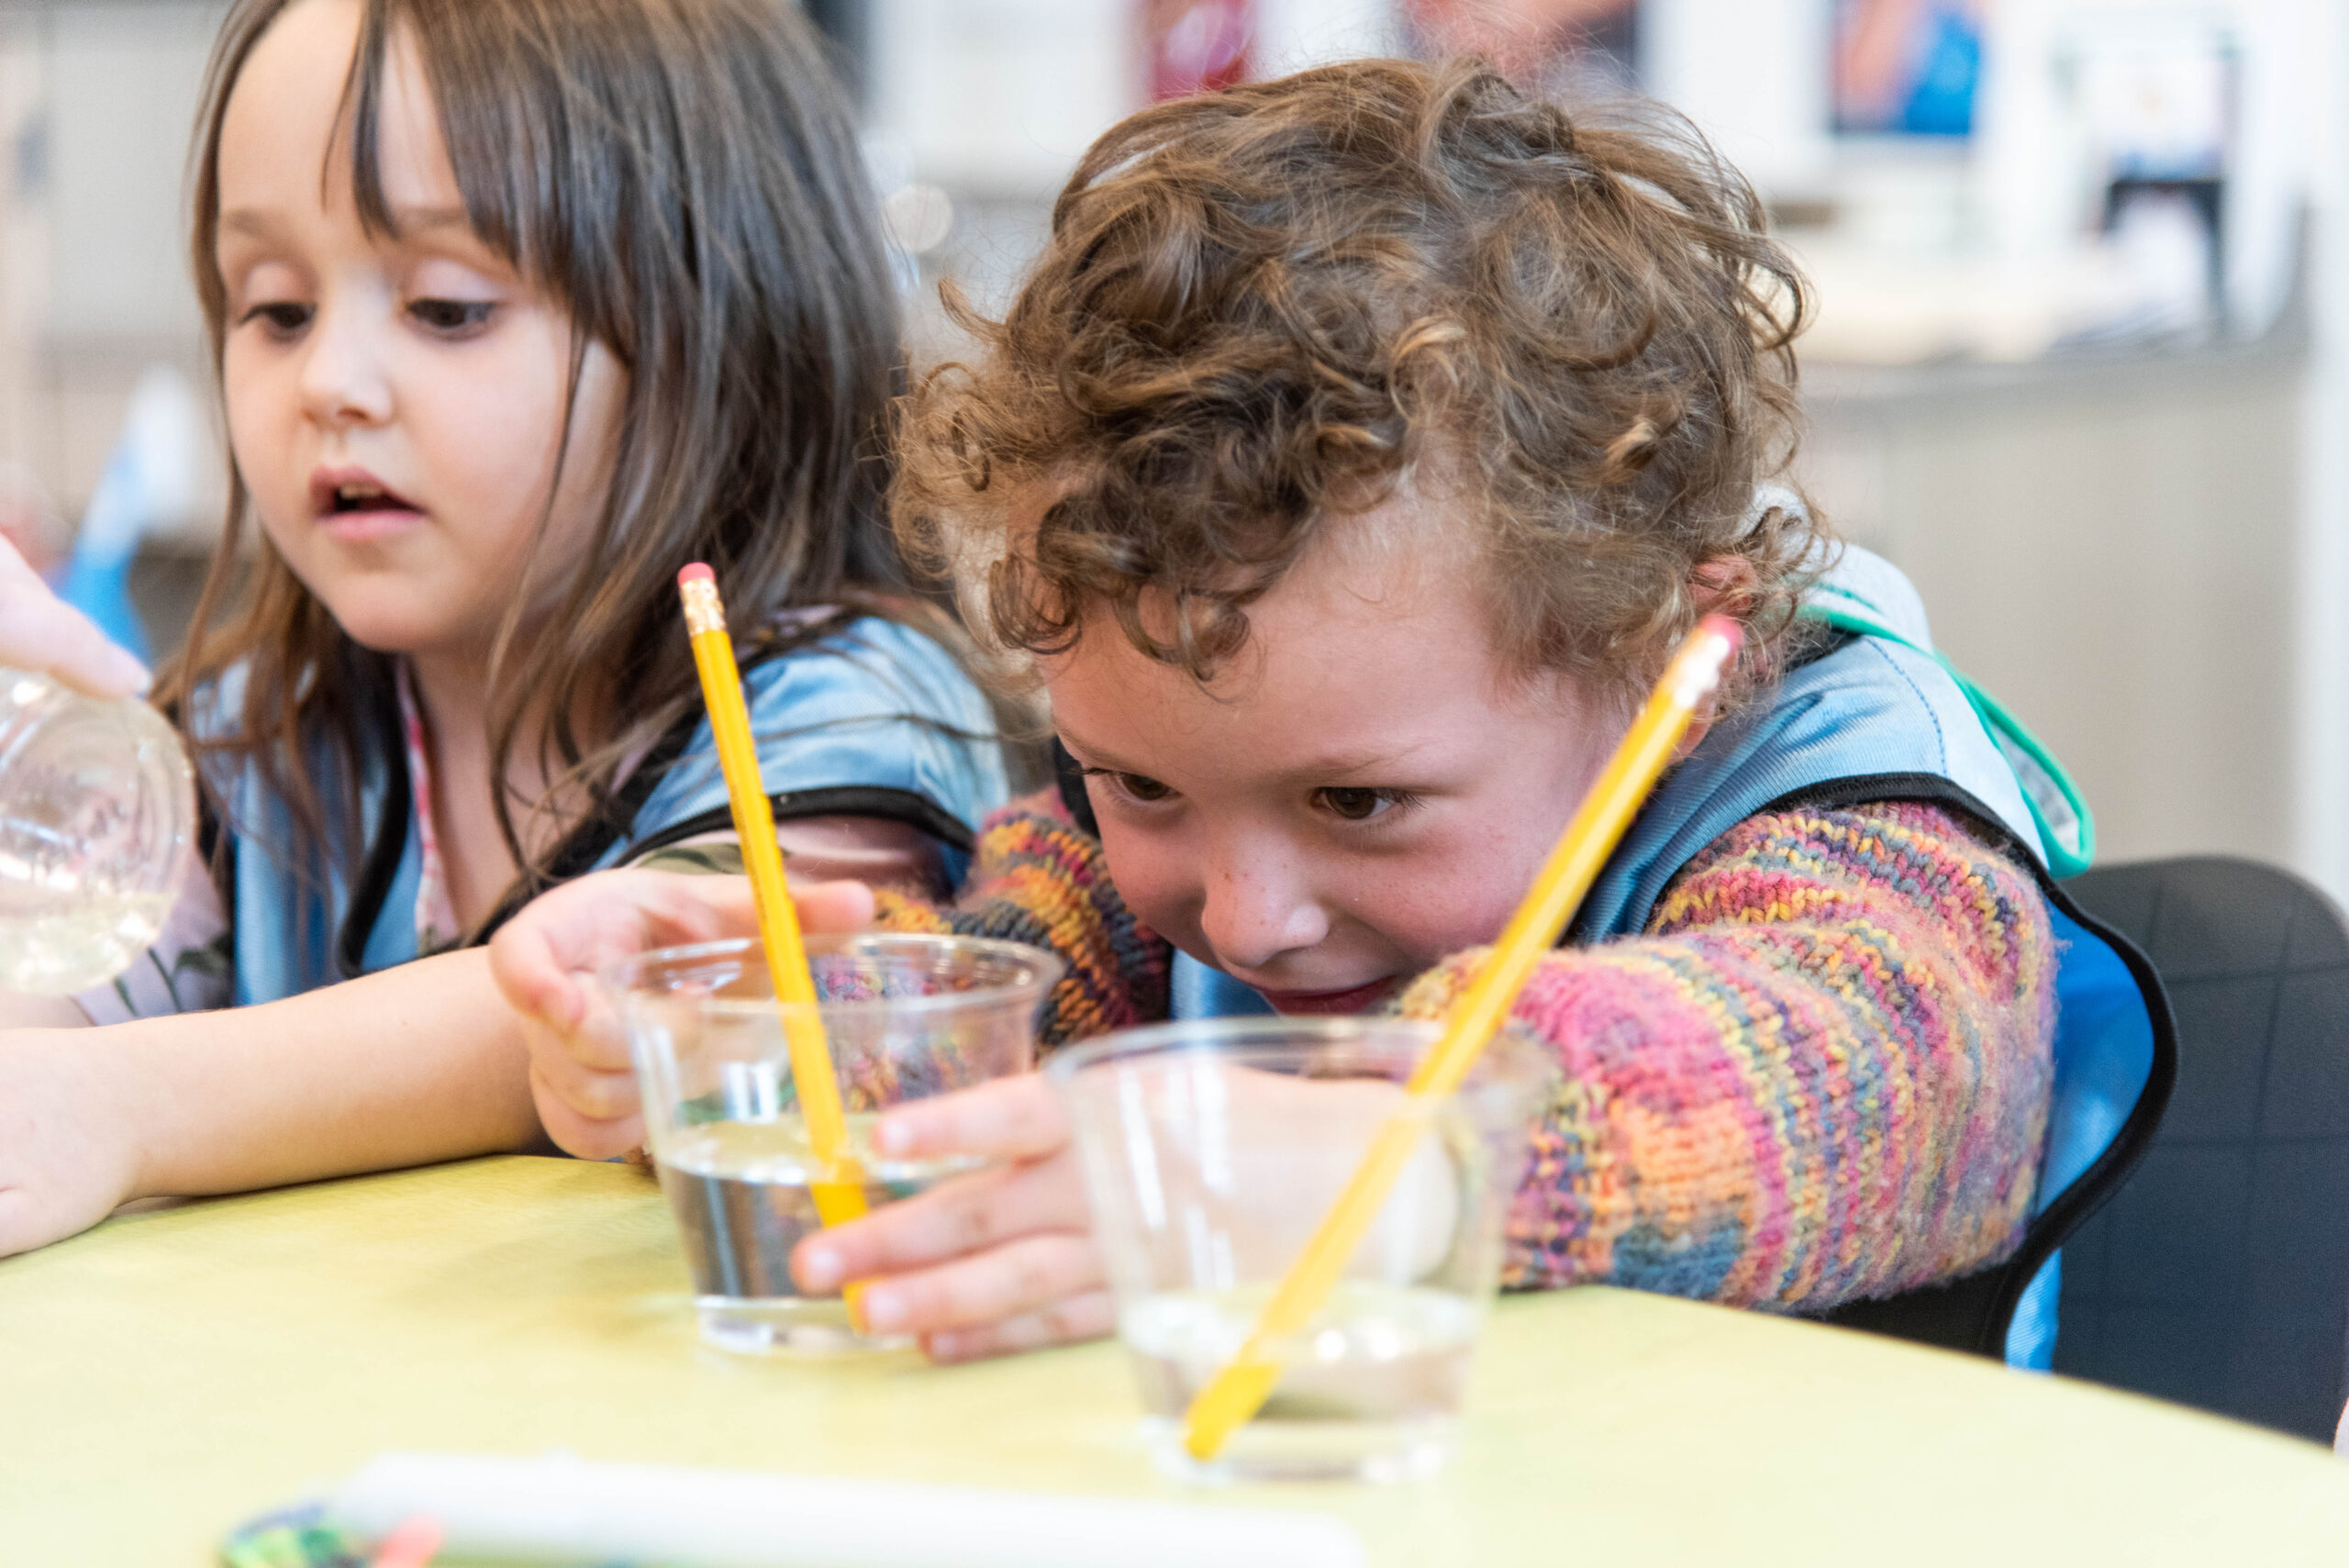 Preschool student during science experiment featuring water cup and pencils